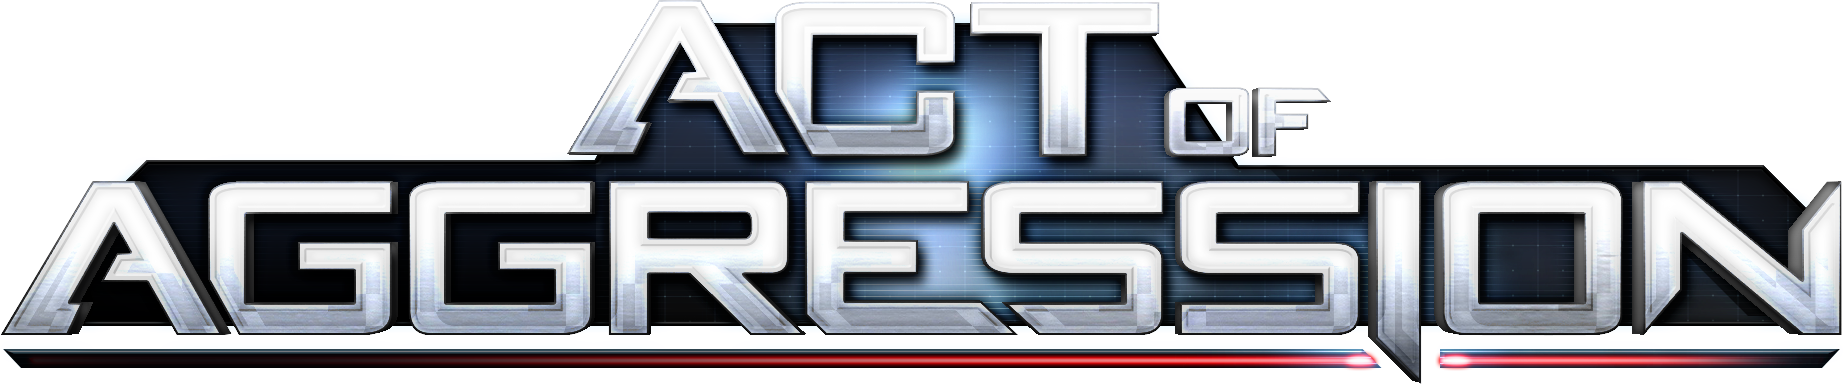 act of aggression torrent